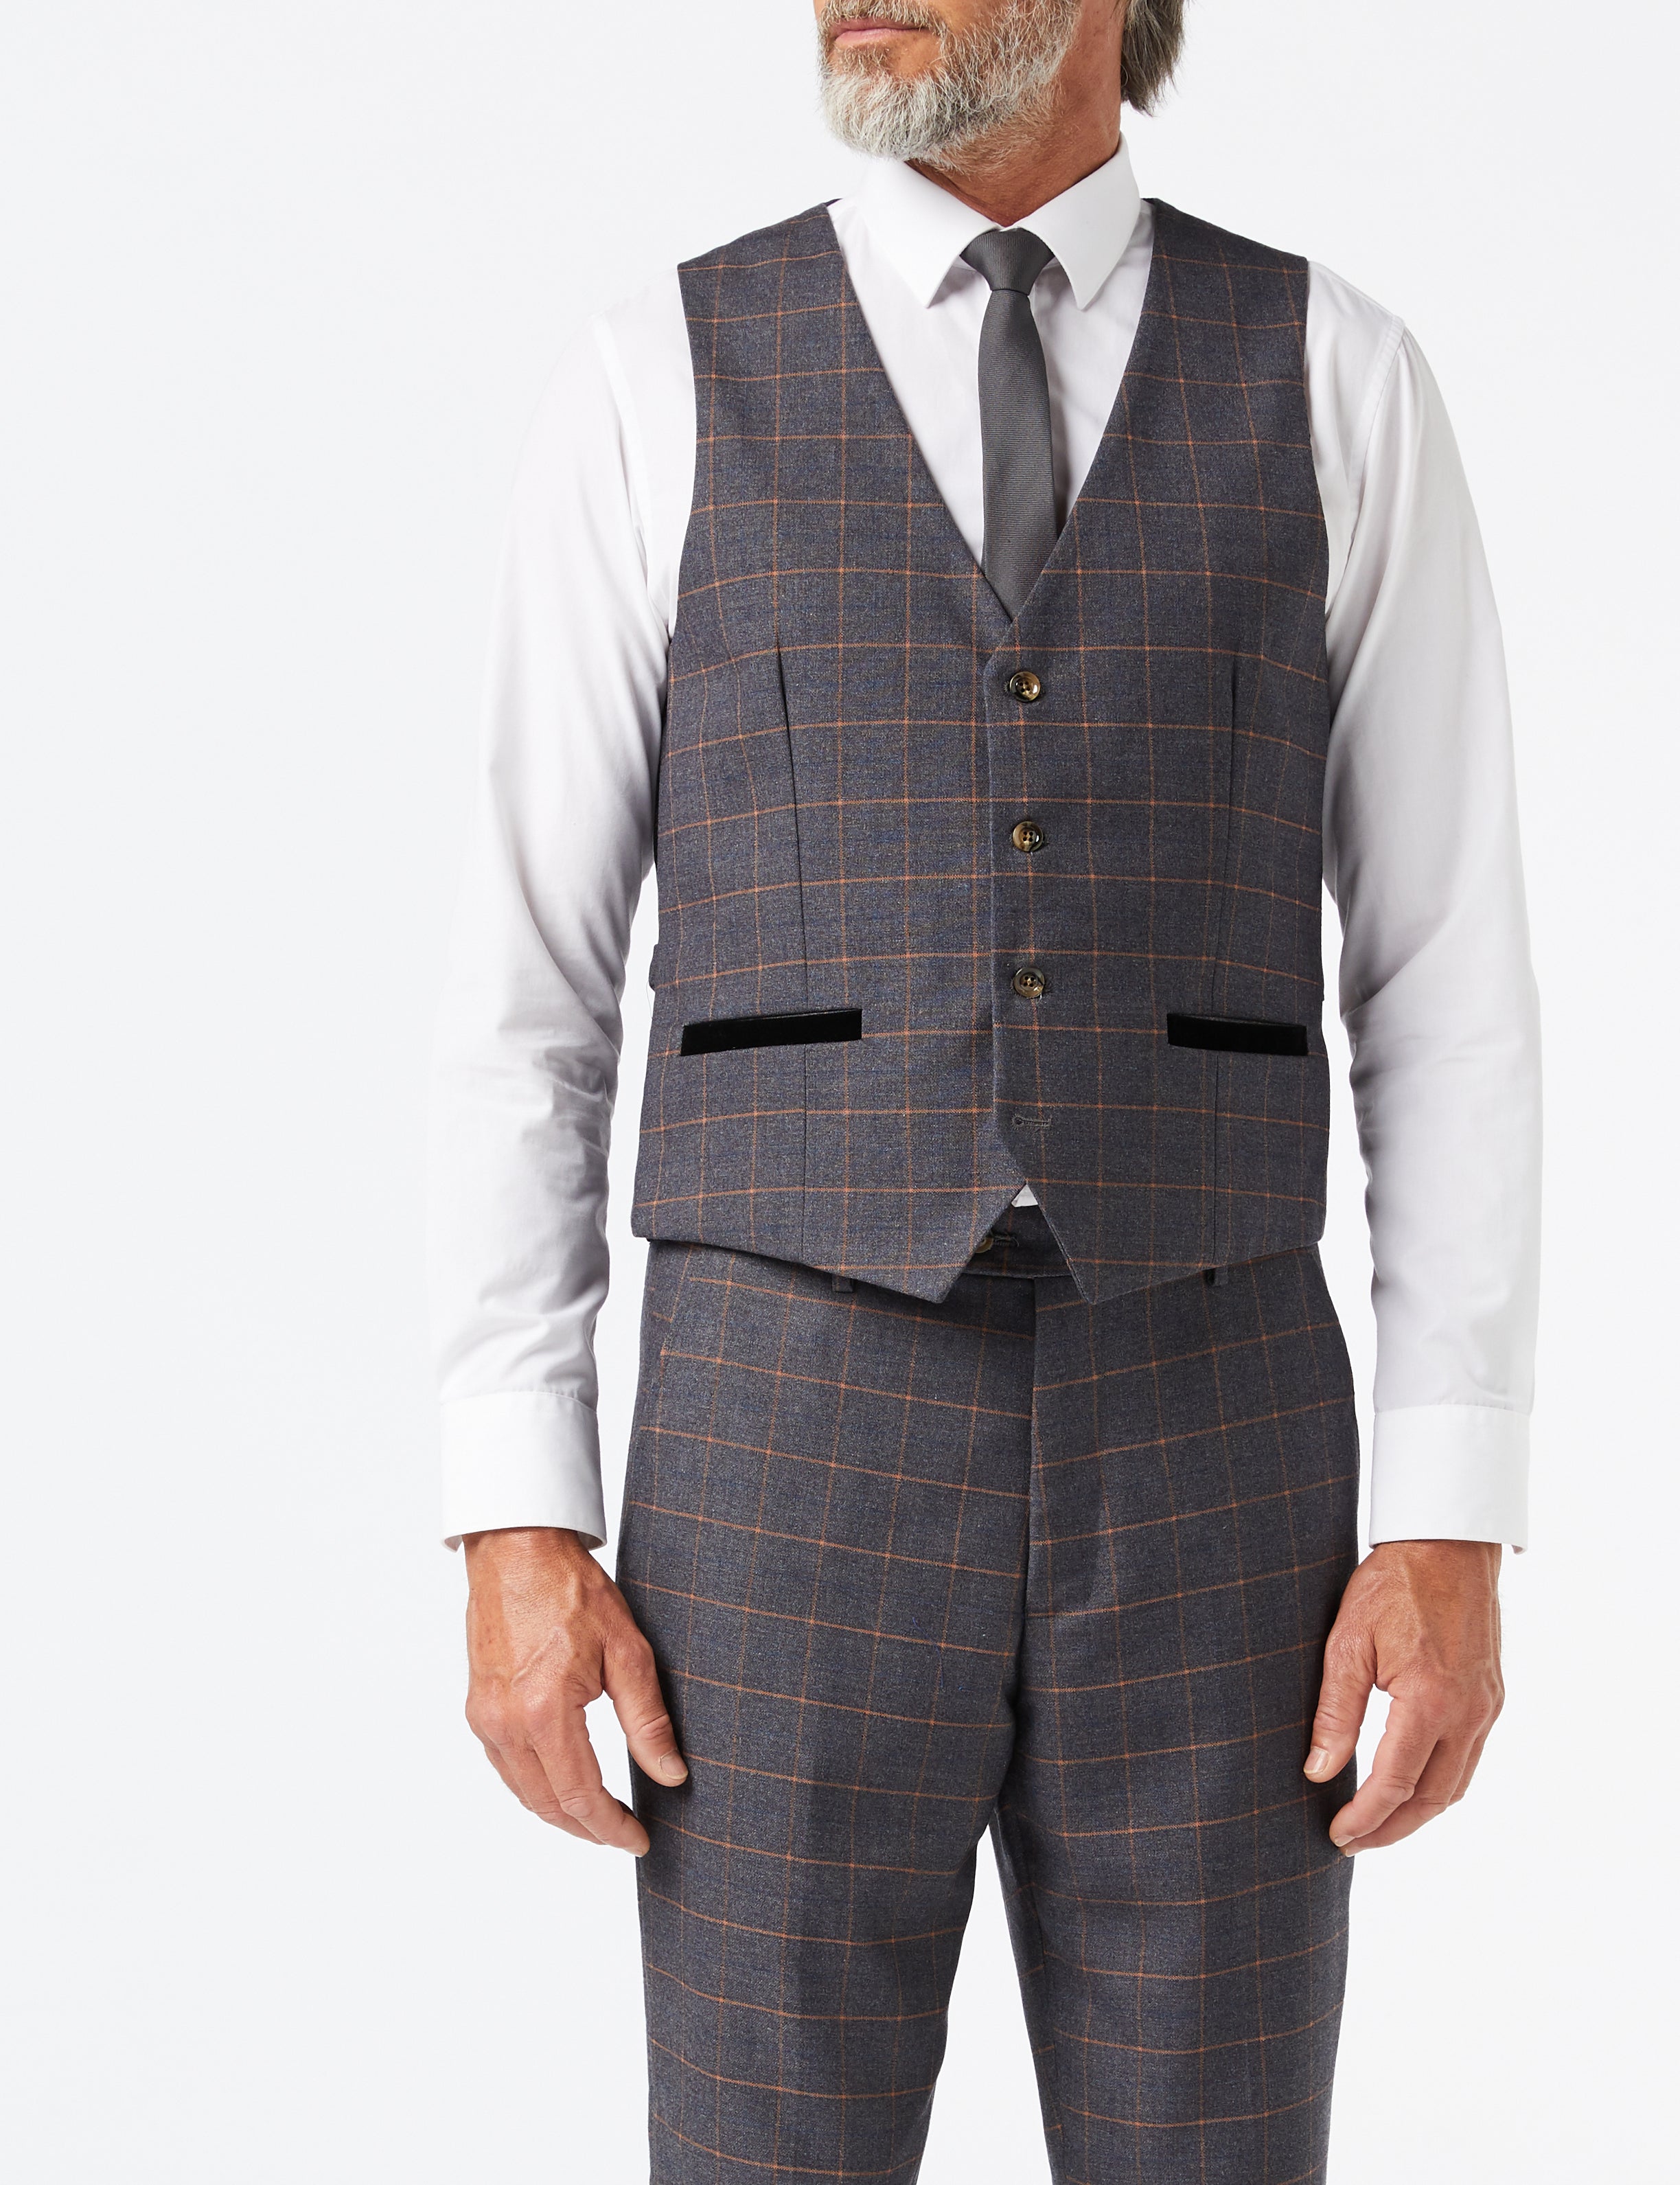 ROGER - GREY CHECK SUIT